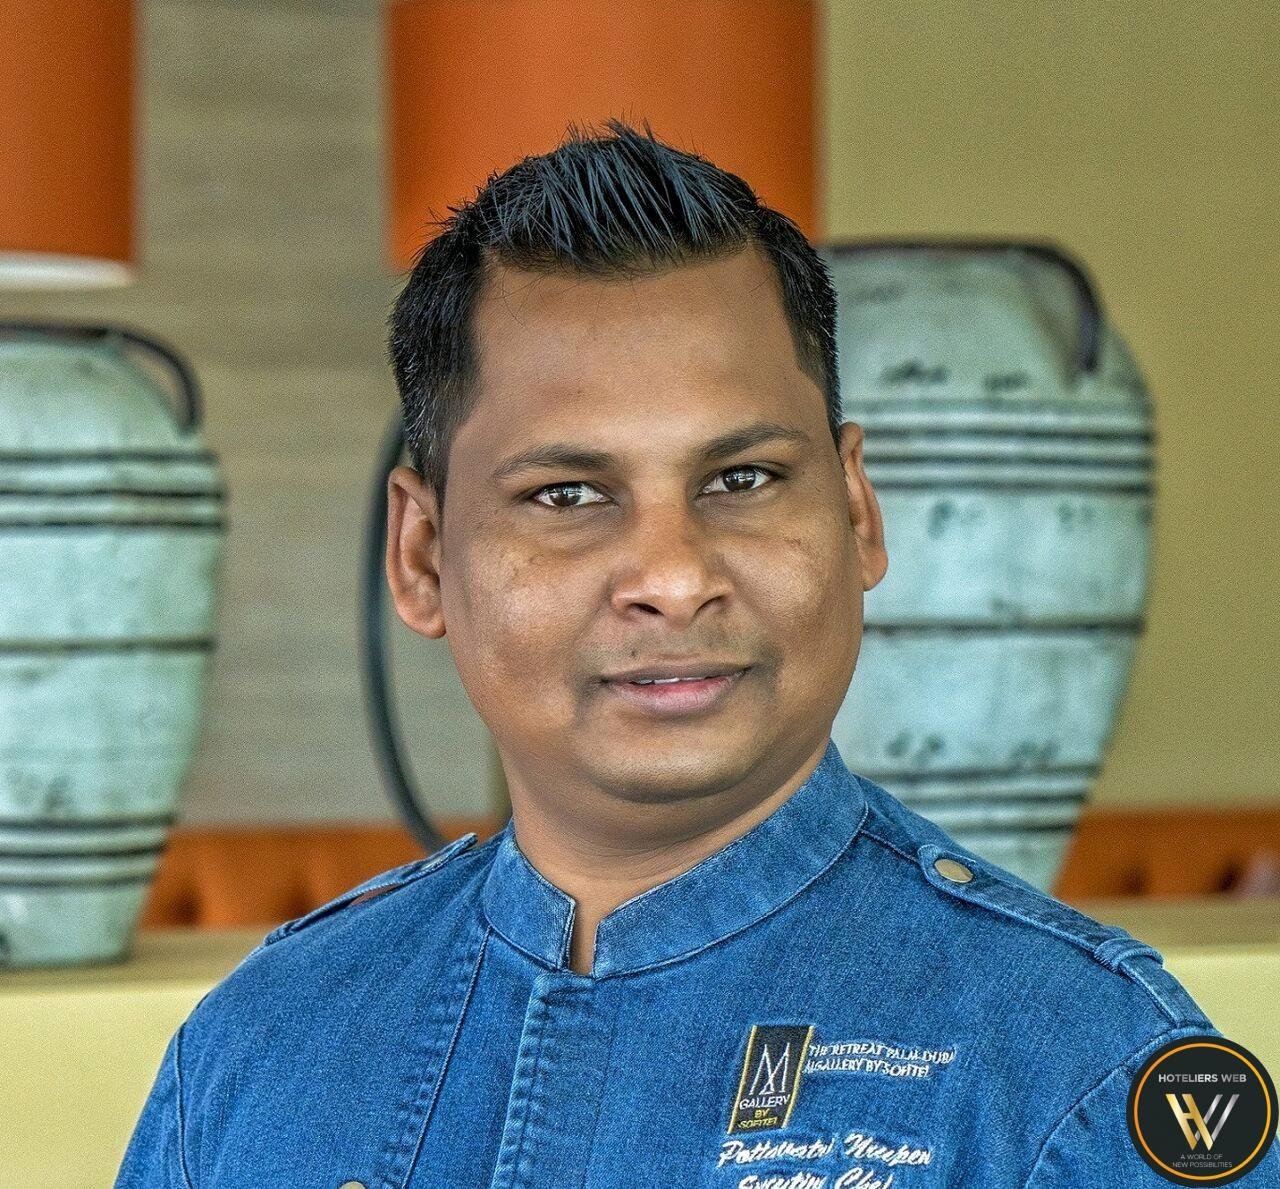 Nrupen Pottavatri is appointed as the new executive chef at The Retreat Palm Dubai